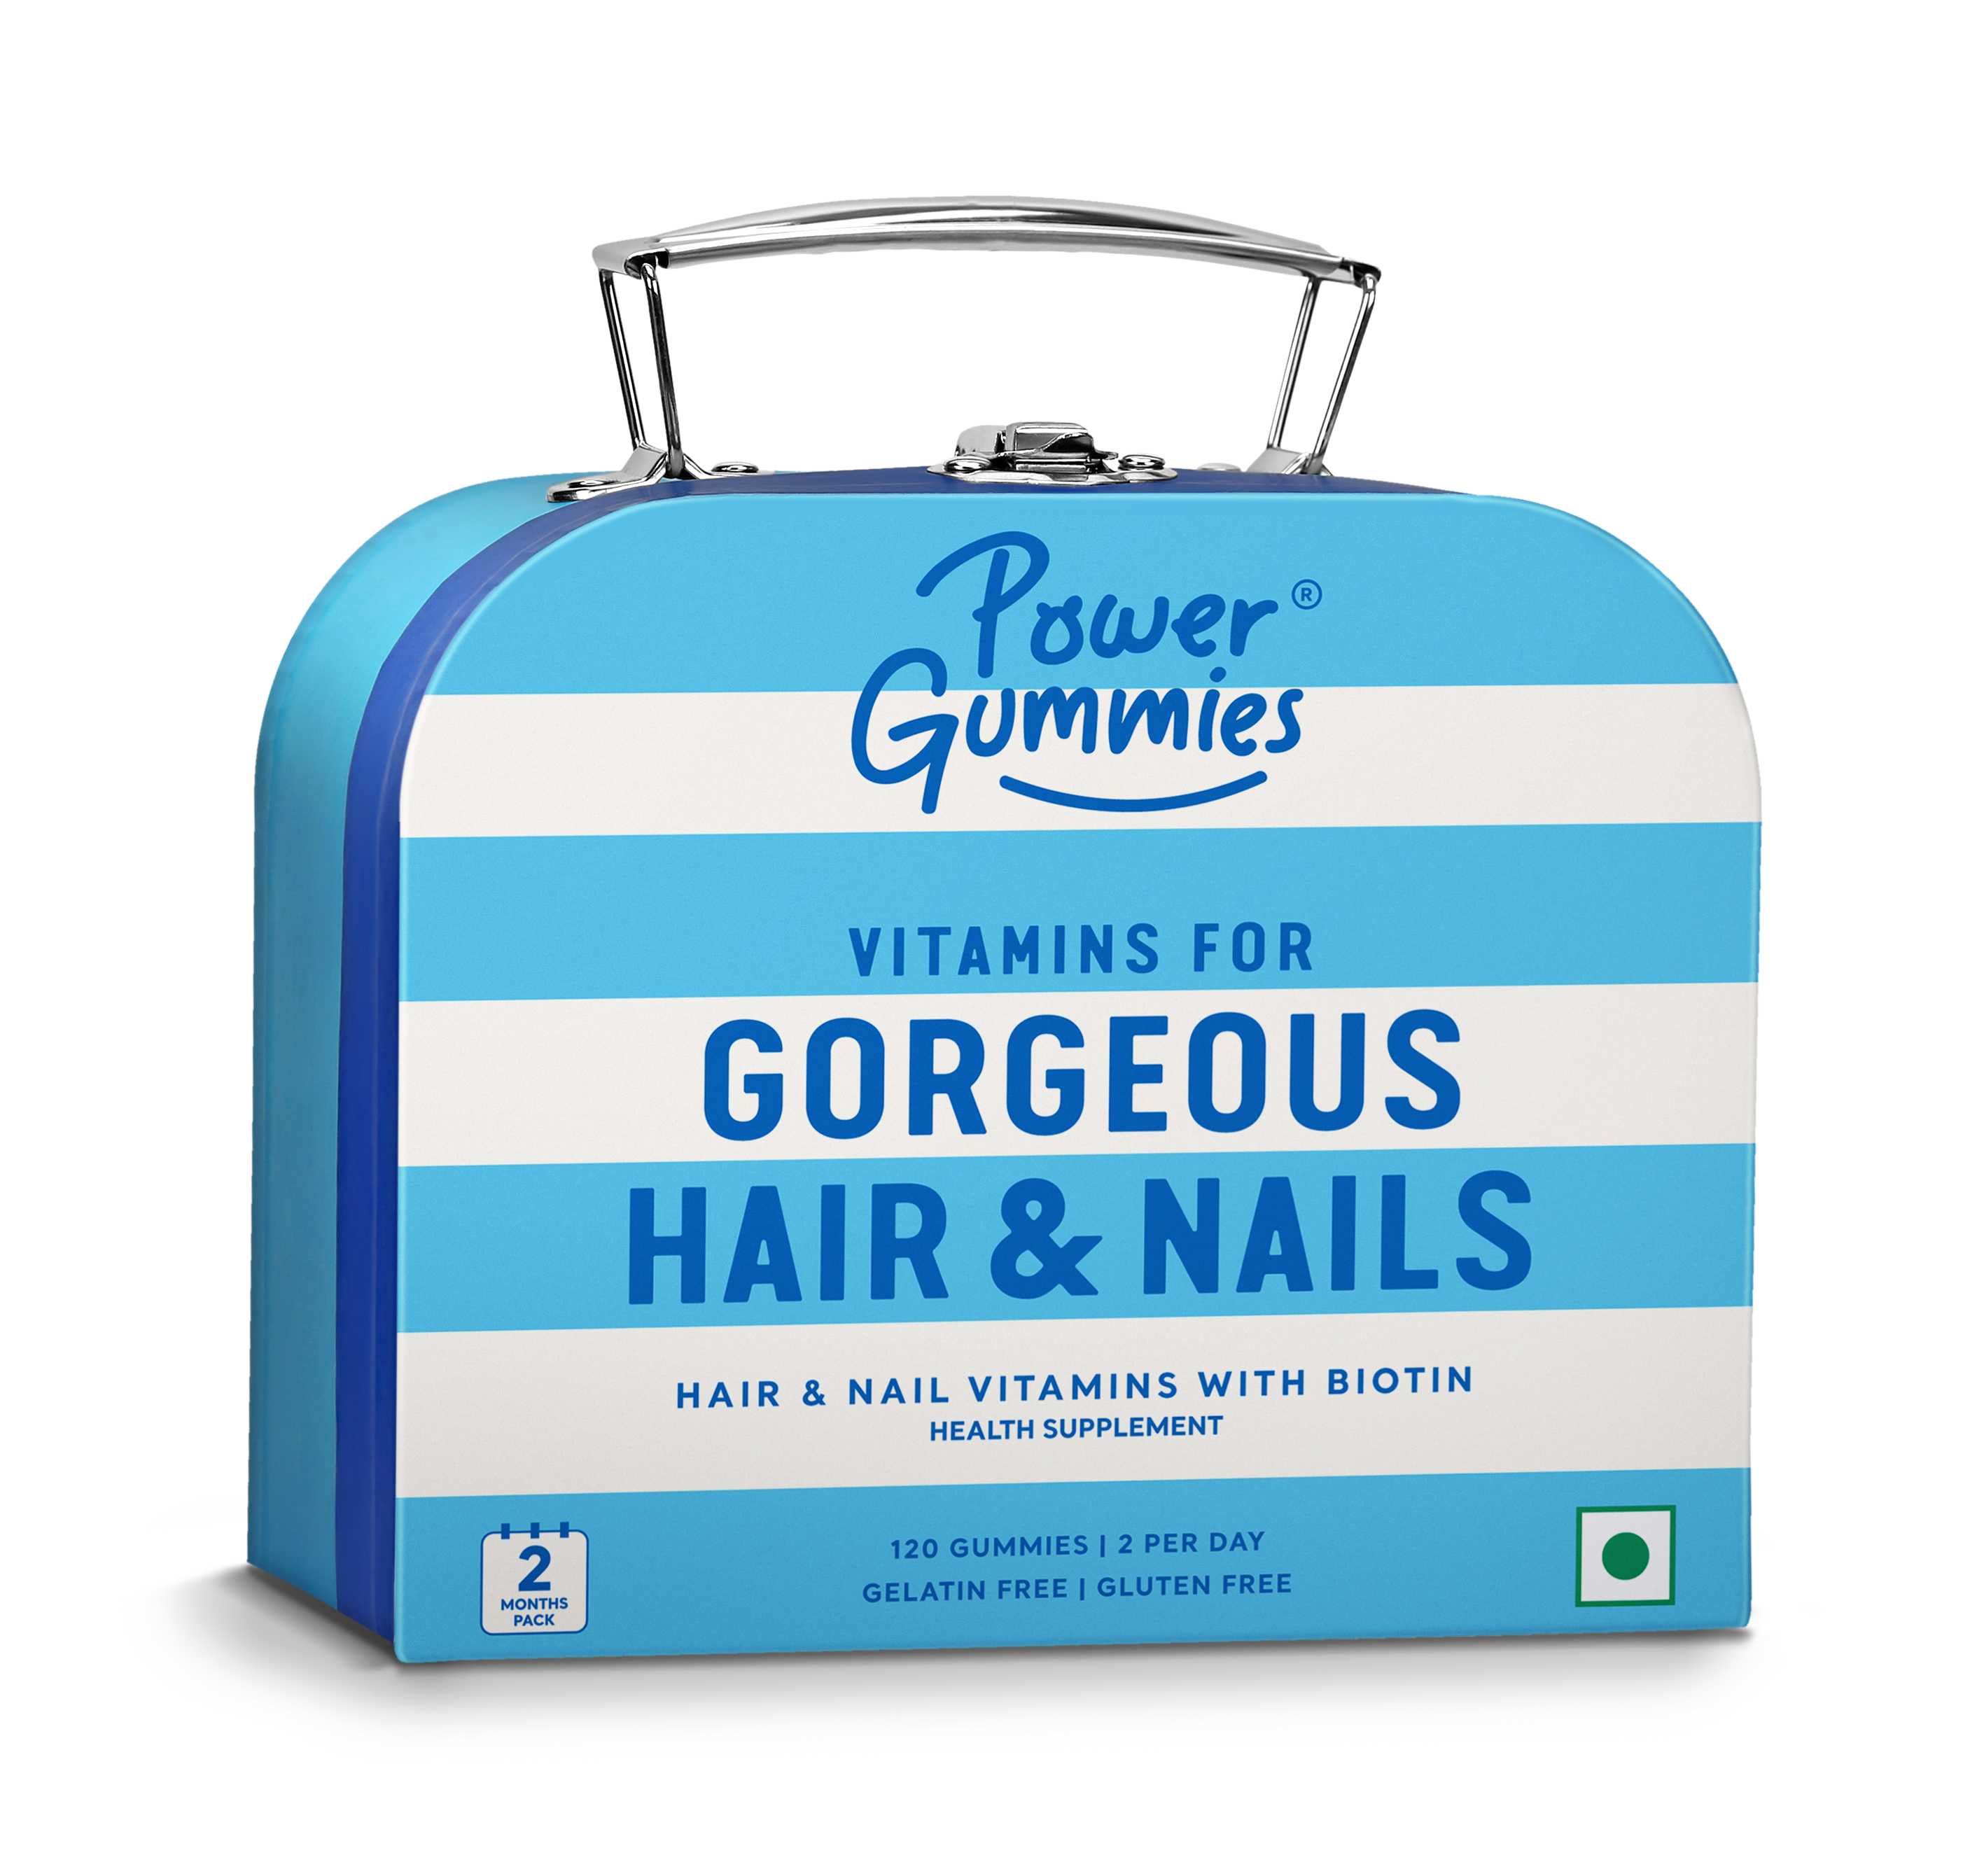 Bag Gorgeous Hair & Nails side image